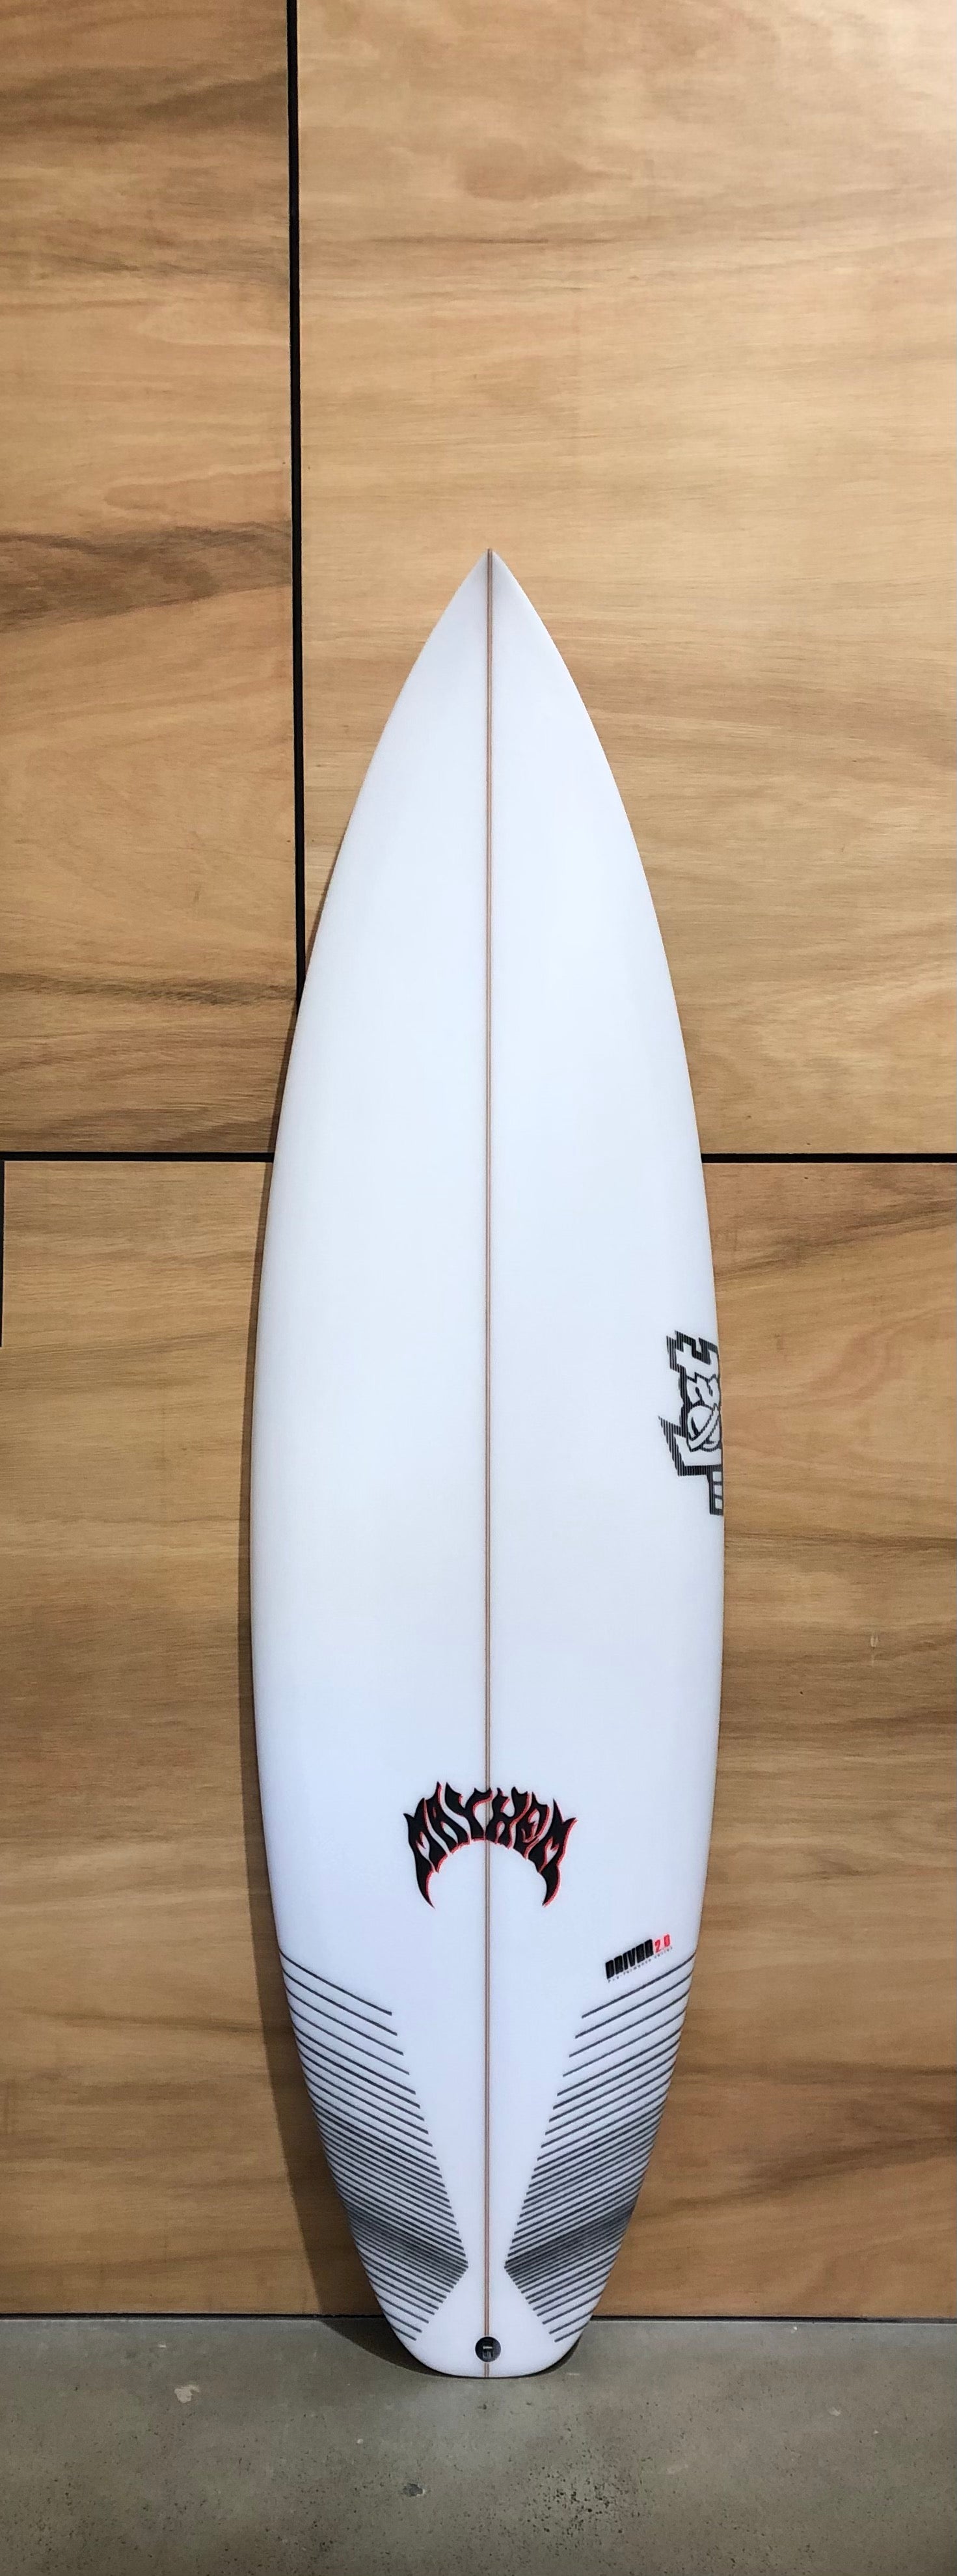 Lost surfboards DRIVER 2.0 メイヘム-